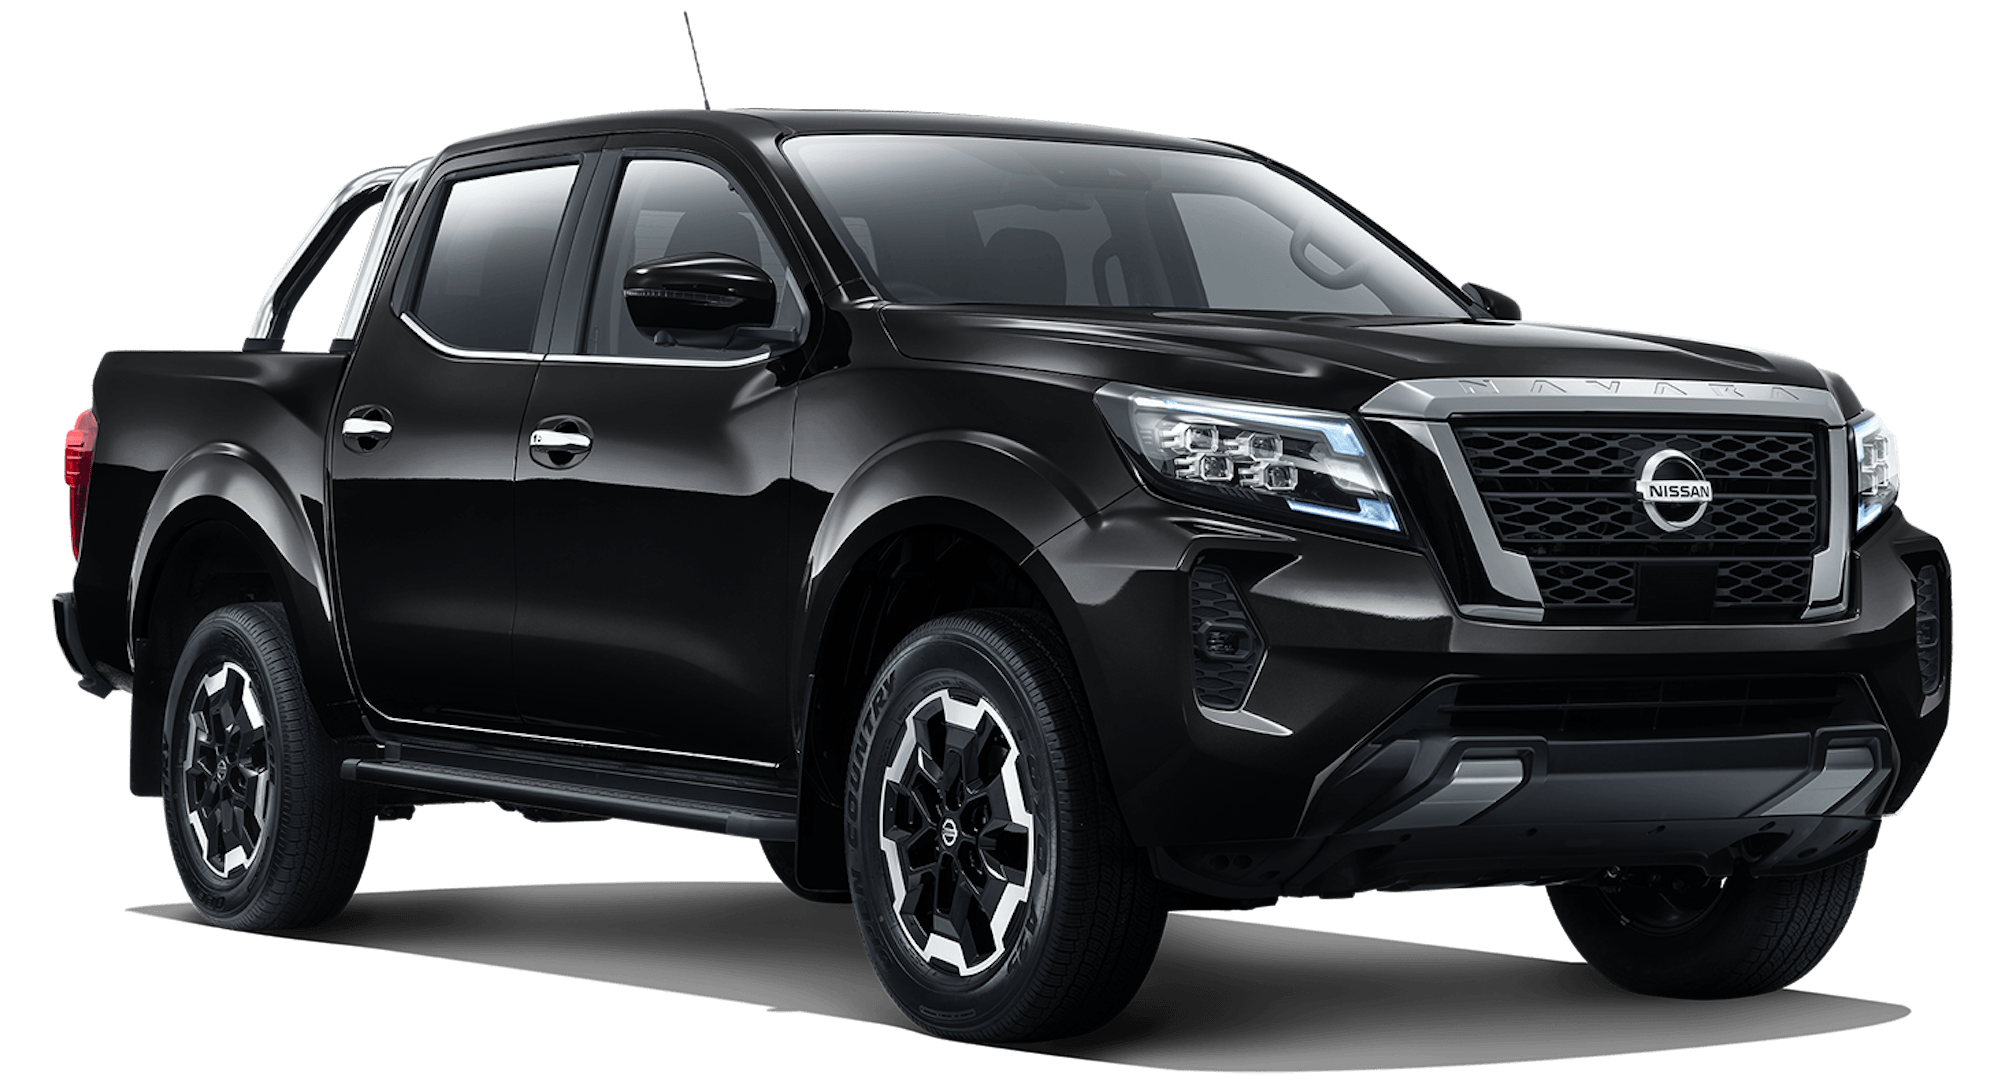 Find your best Nissan Navara finance rate with Driva